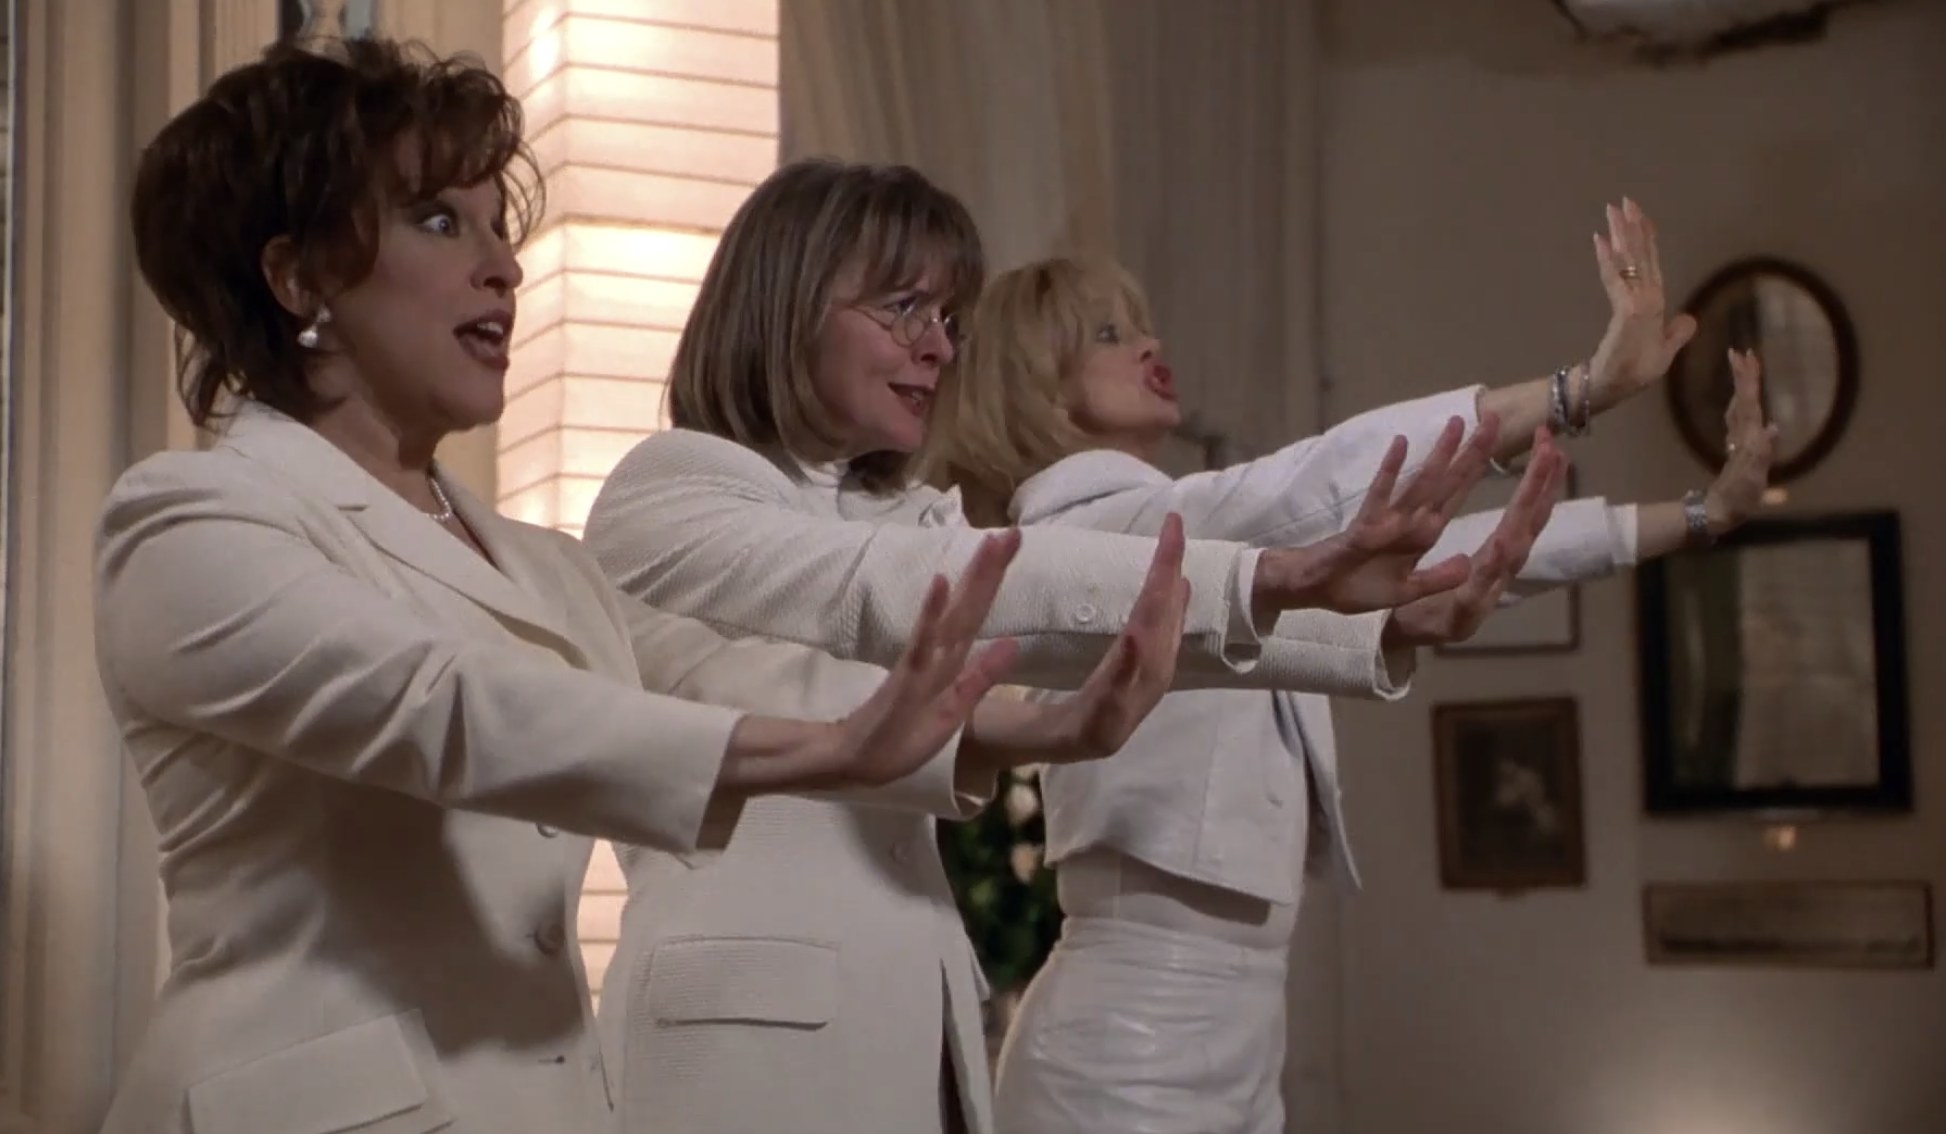 Actors Bette Midler, Diane Keaton, and Goldie Hawn wear all-white outfits. They have their hands up before them as they sing.